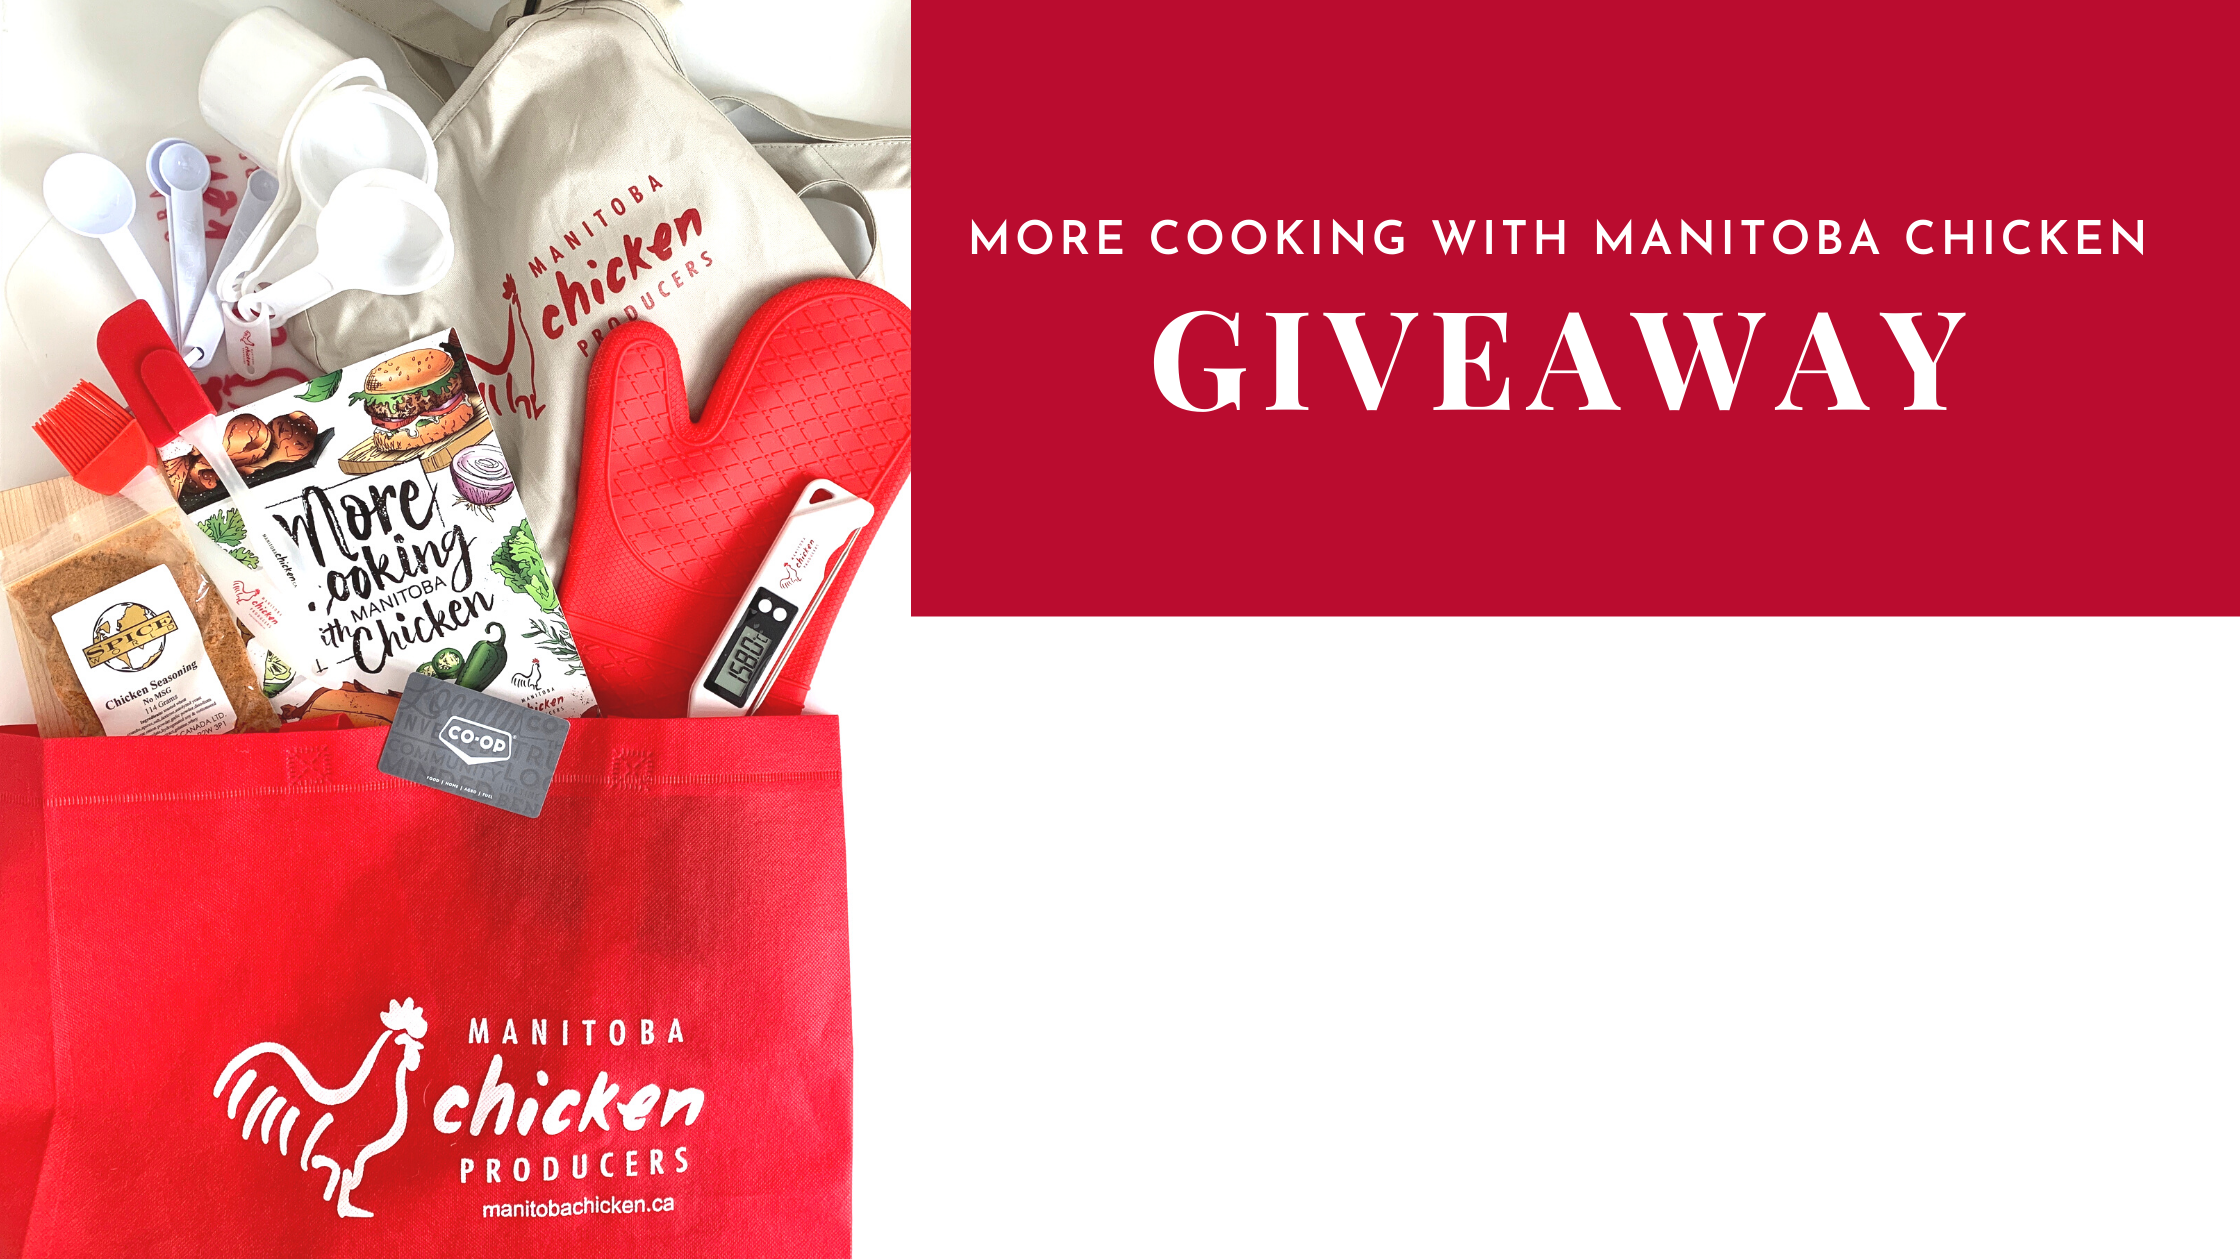 More Cooking with Manitoba Chicken Giveaway